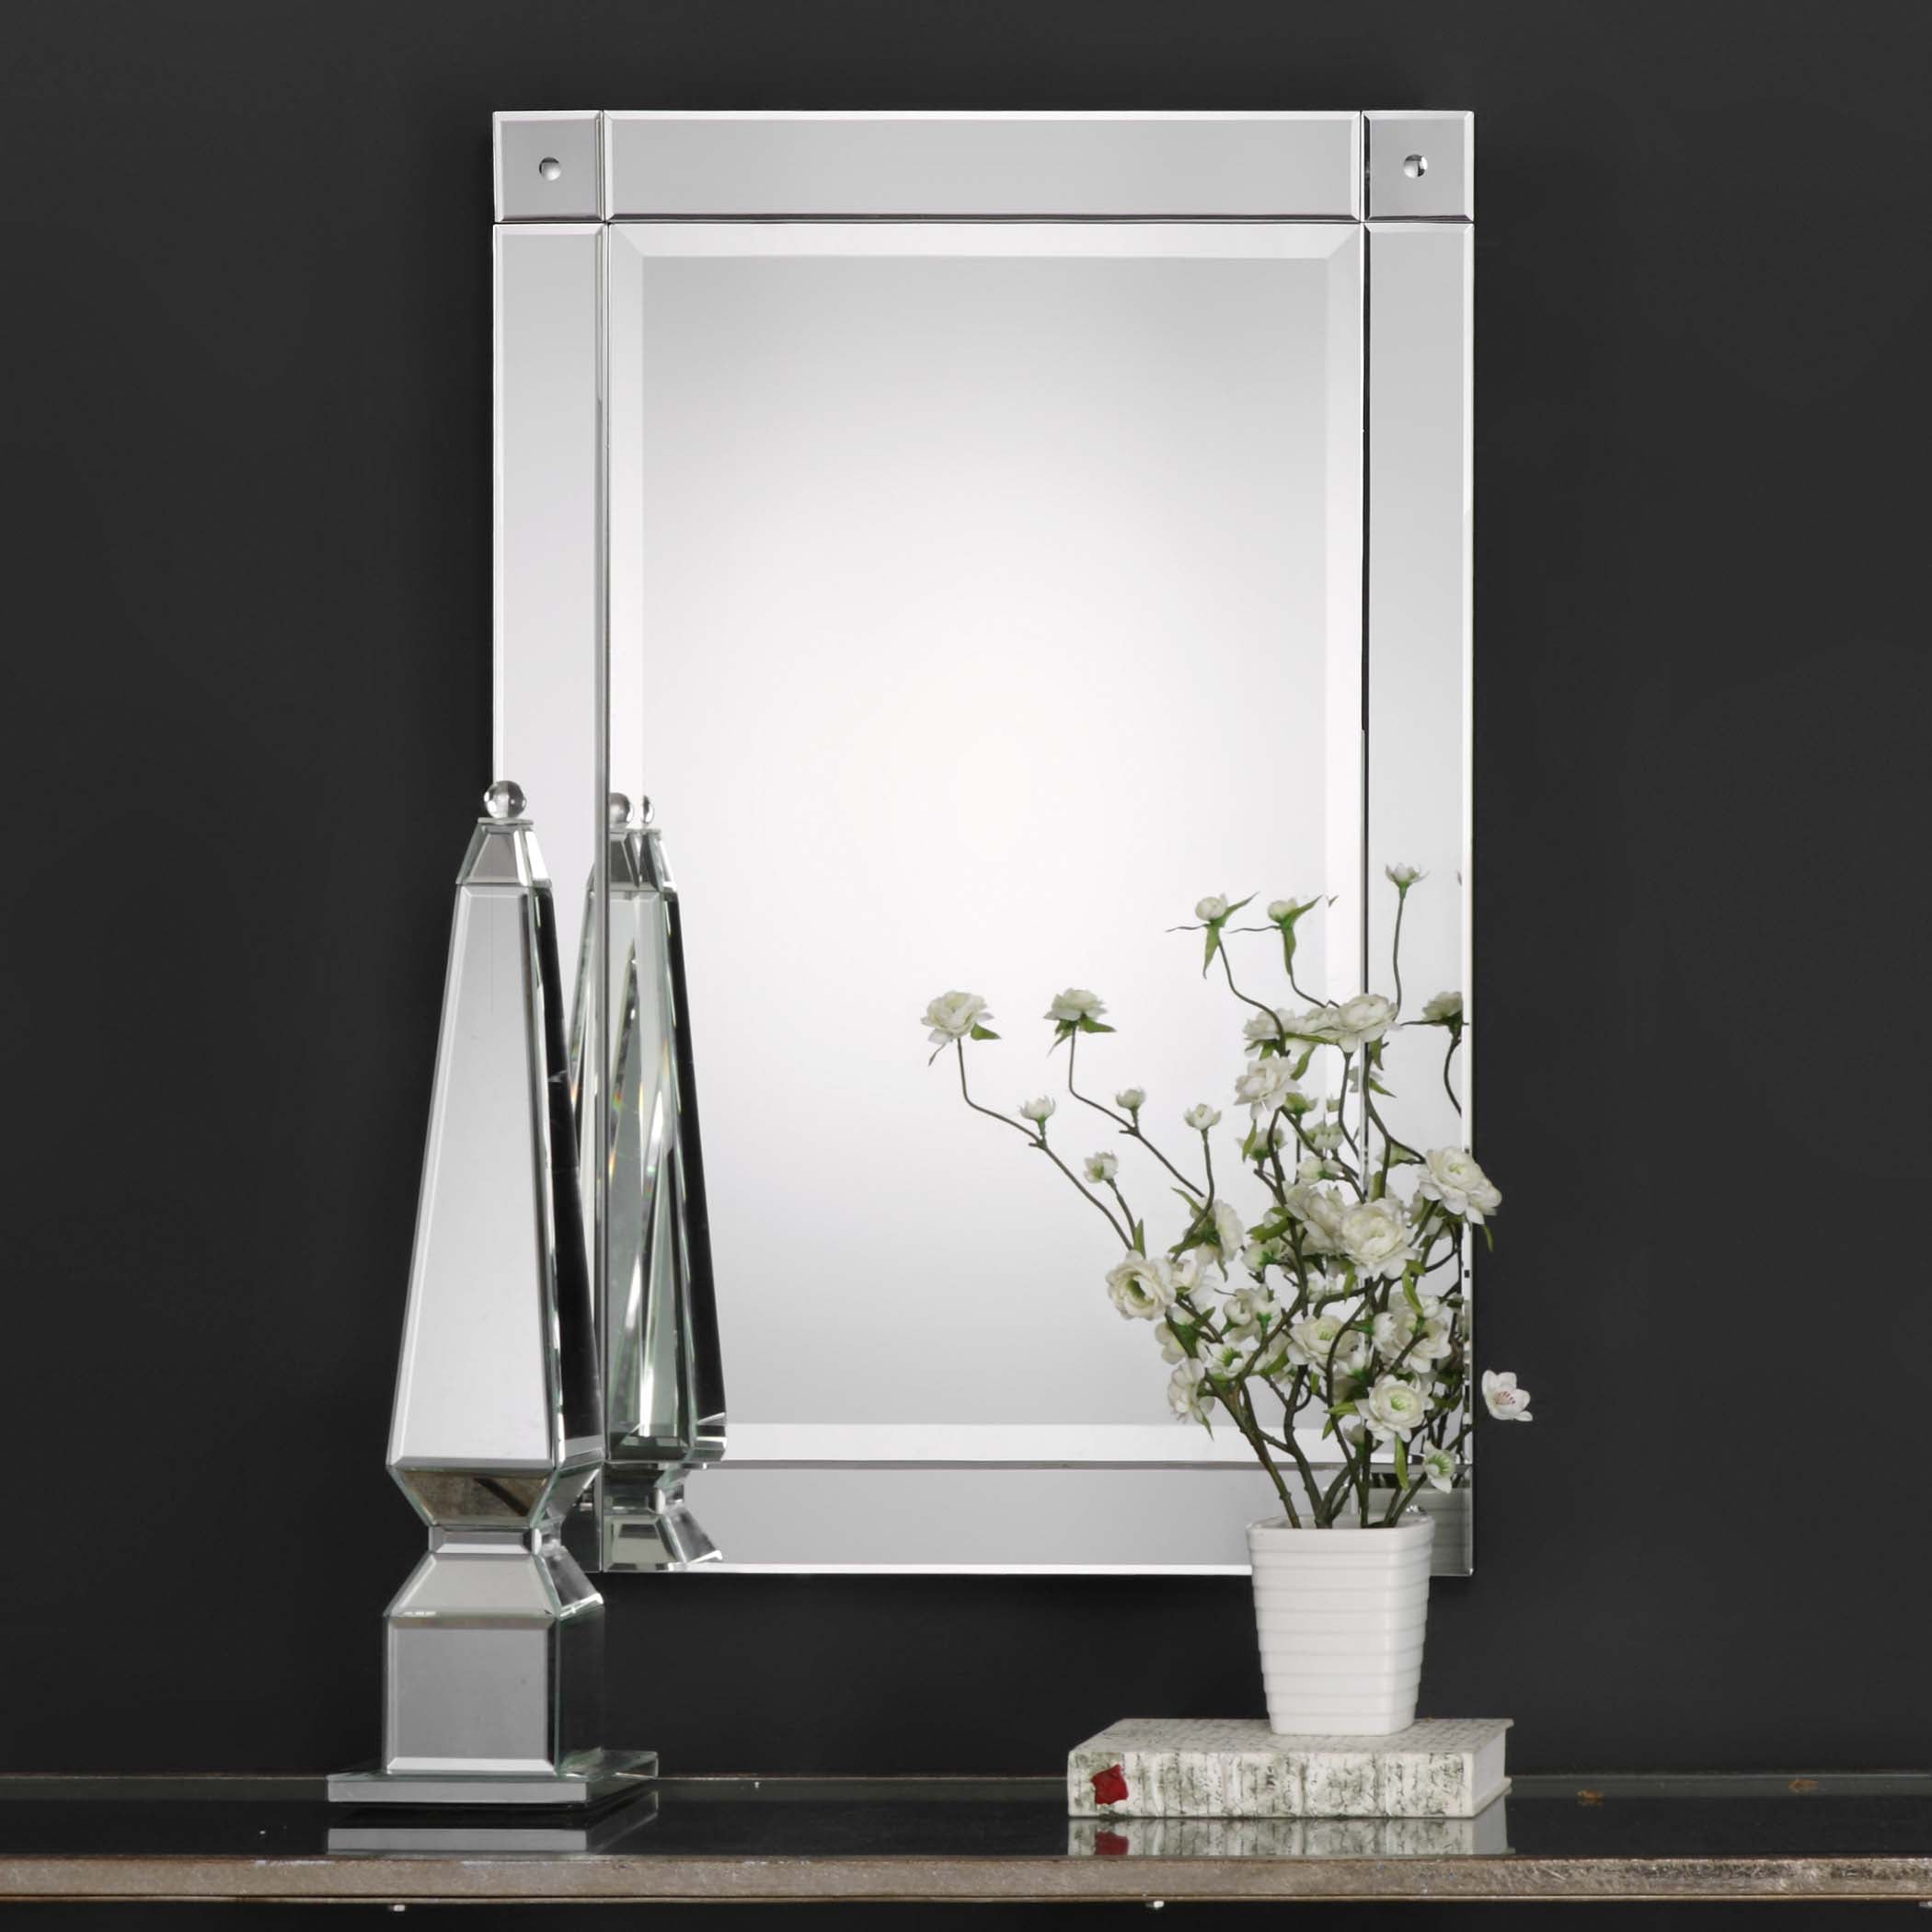 Traditional Beveled Accent Mirror